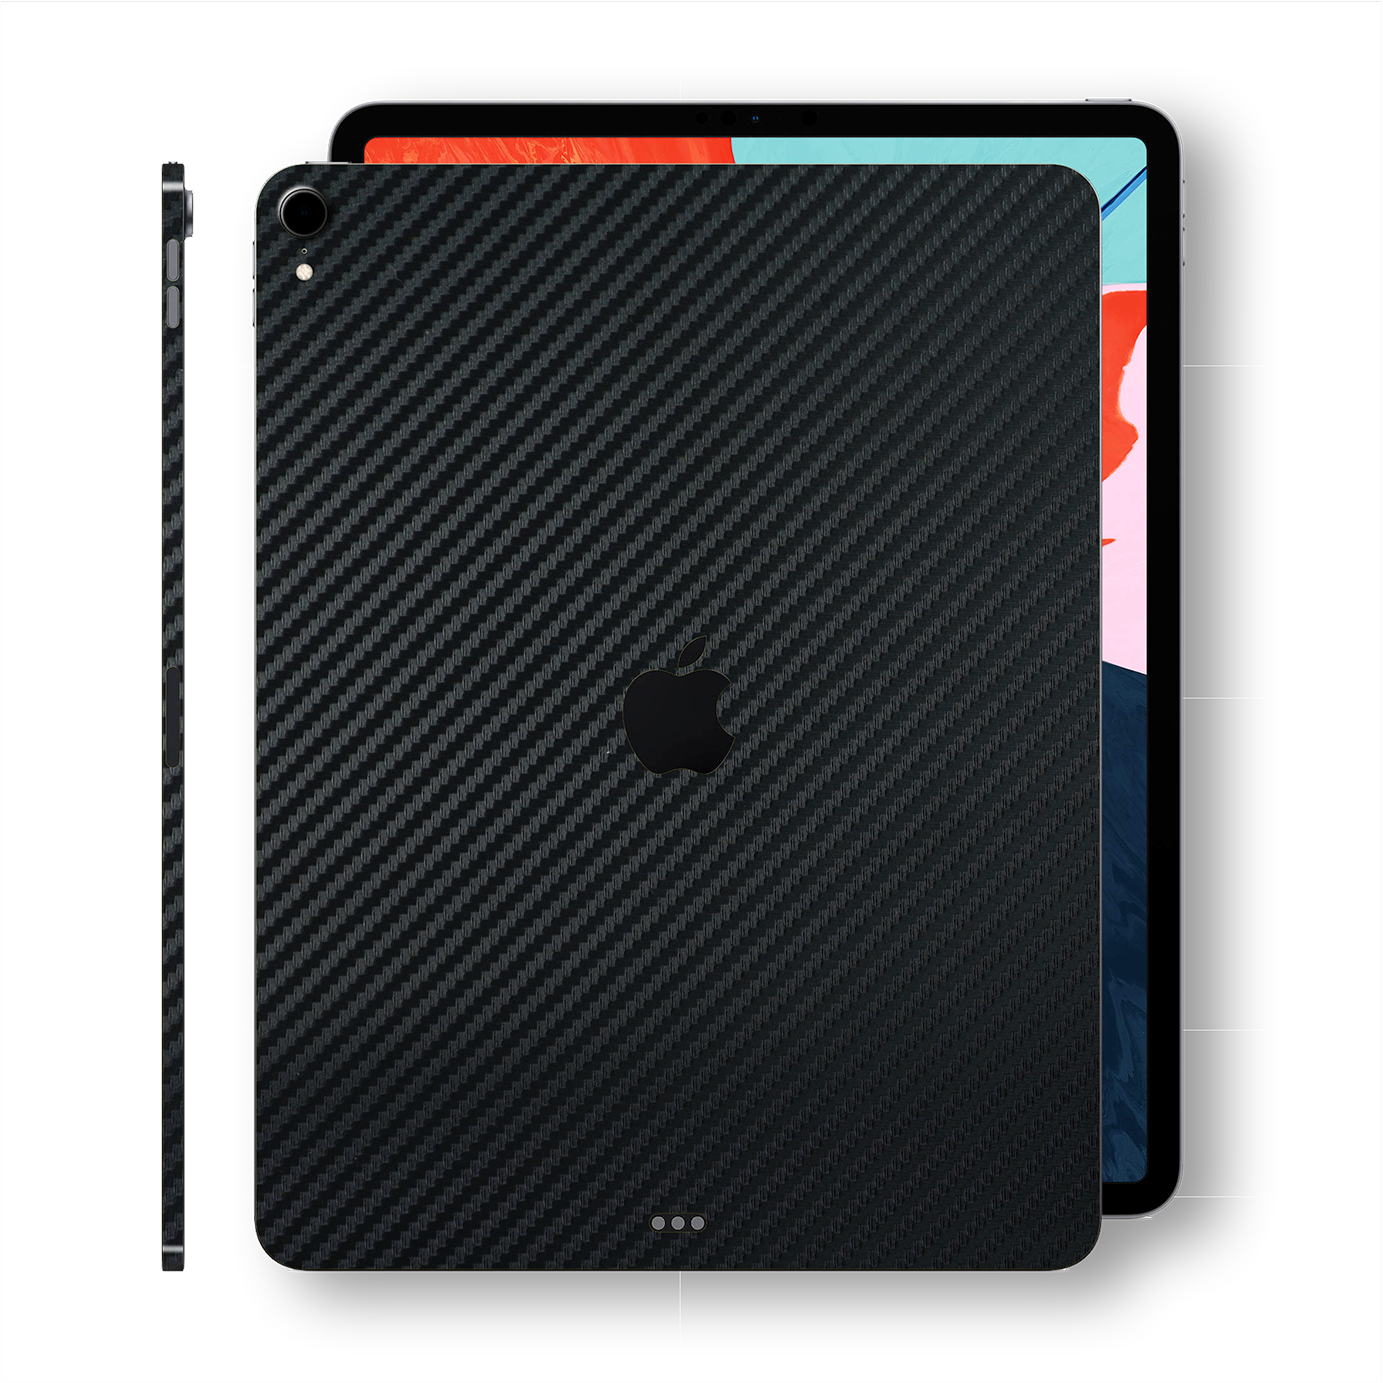 iPad PRO 12.9" 3rd Generation 2018 Black 3D Textured CARBON Fibre Fiber Skin Wrap Sticker Decal Cover Protector by EasySkinz